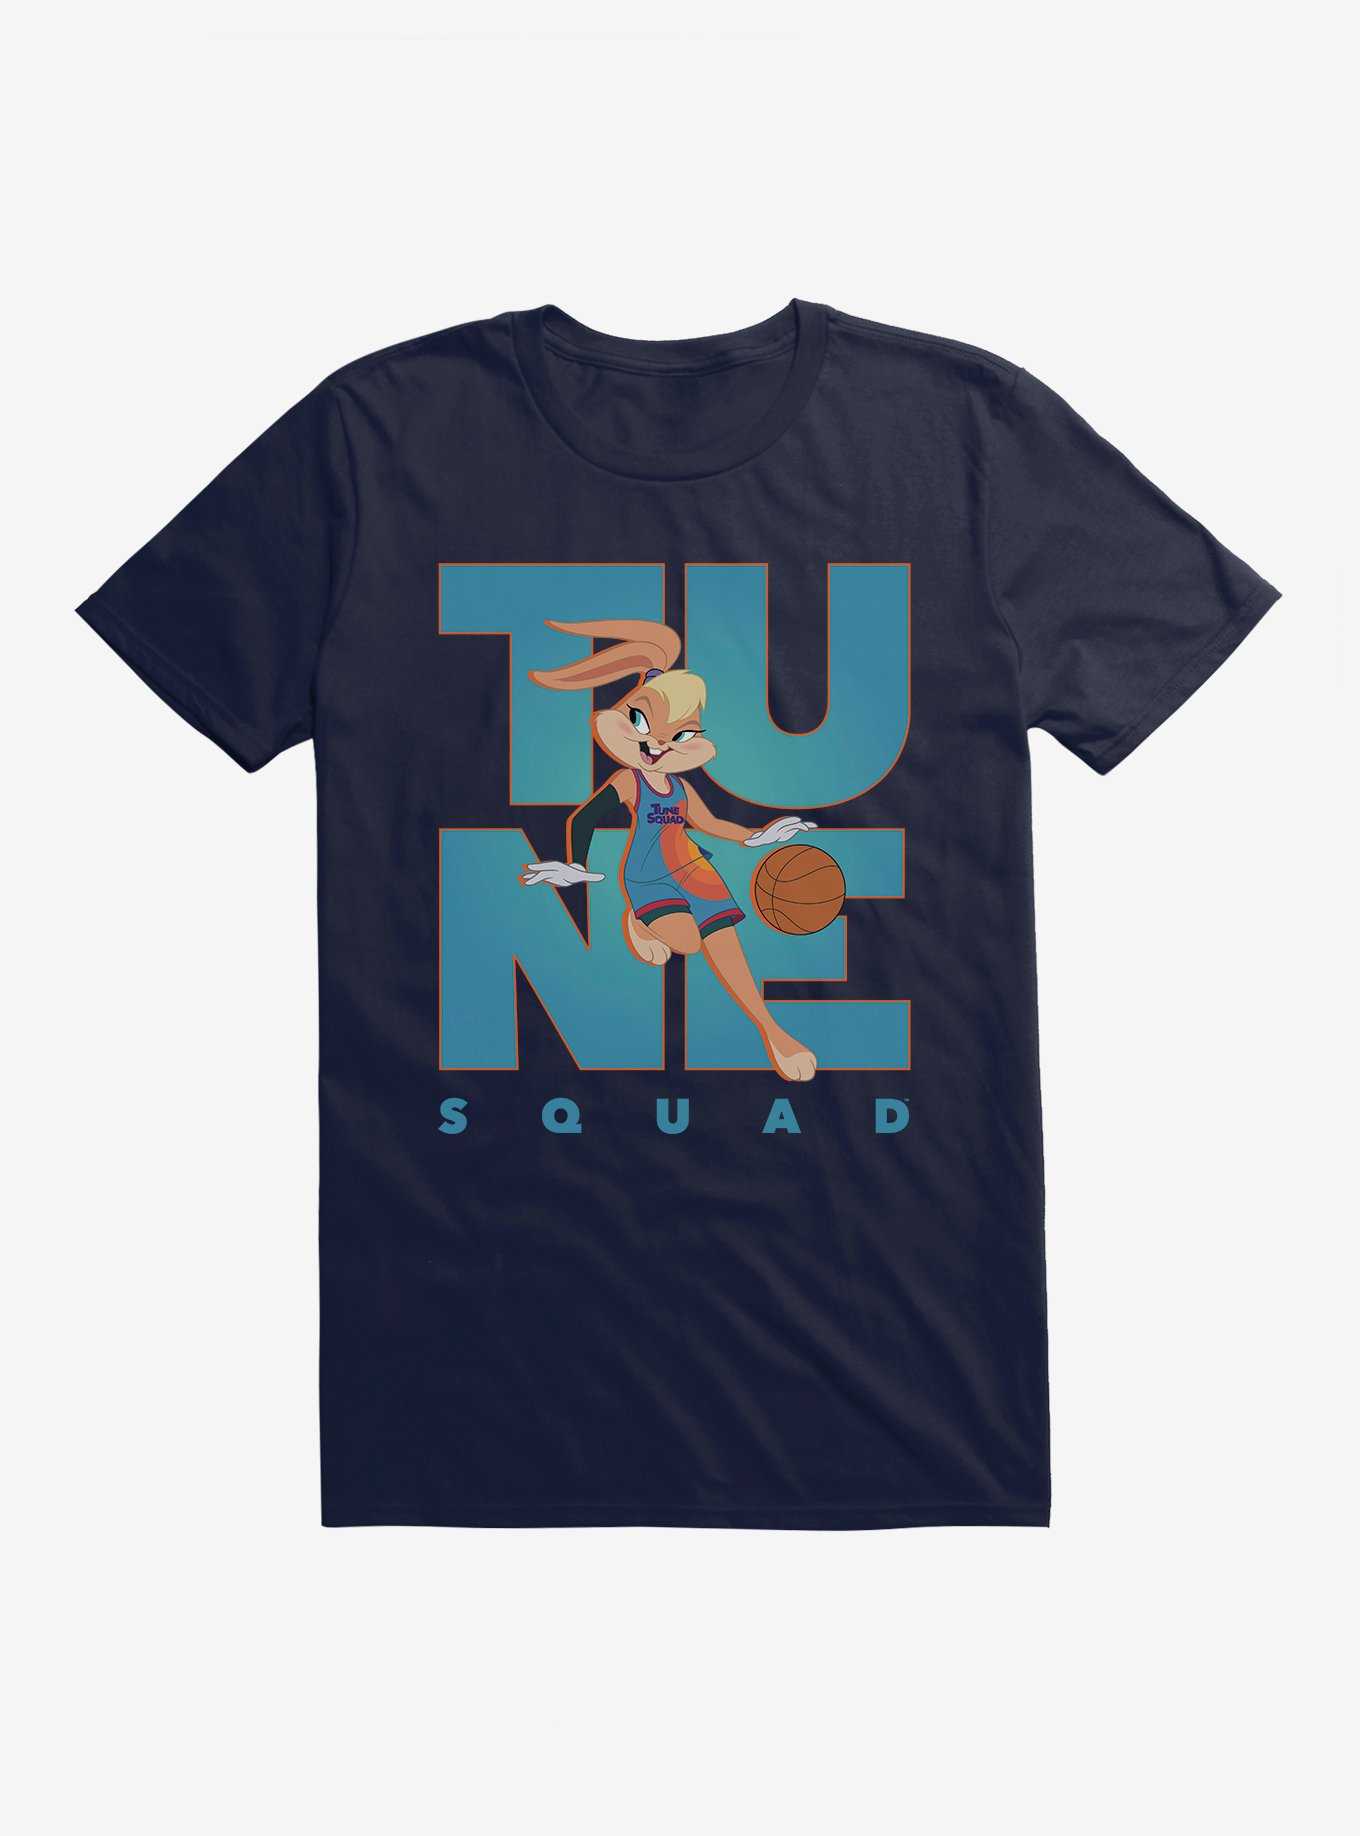 Space Jam: A New Legacy Dribble Lola Bunny Tune Squad T-Shirt, , hi-res